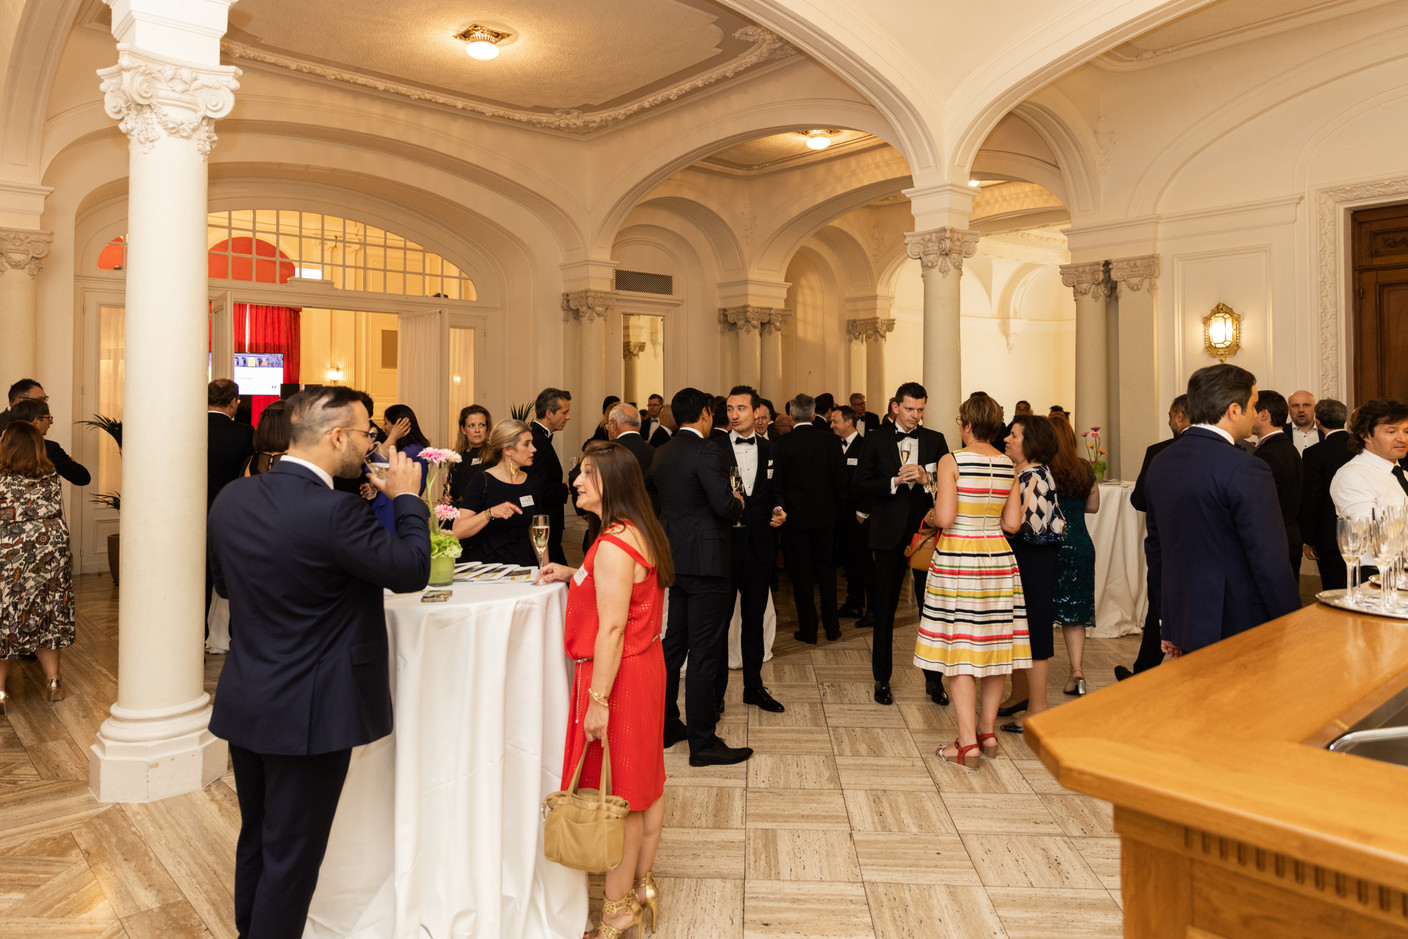 Attendees at a gala dinner to launch EY Luxembourg's 2023 attractiveness survey, held at the Cercle Cité on 15 June. Photo: Romain Gamba/Maison Moderne